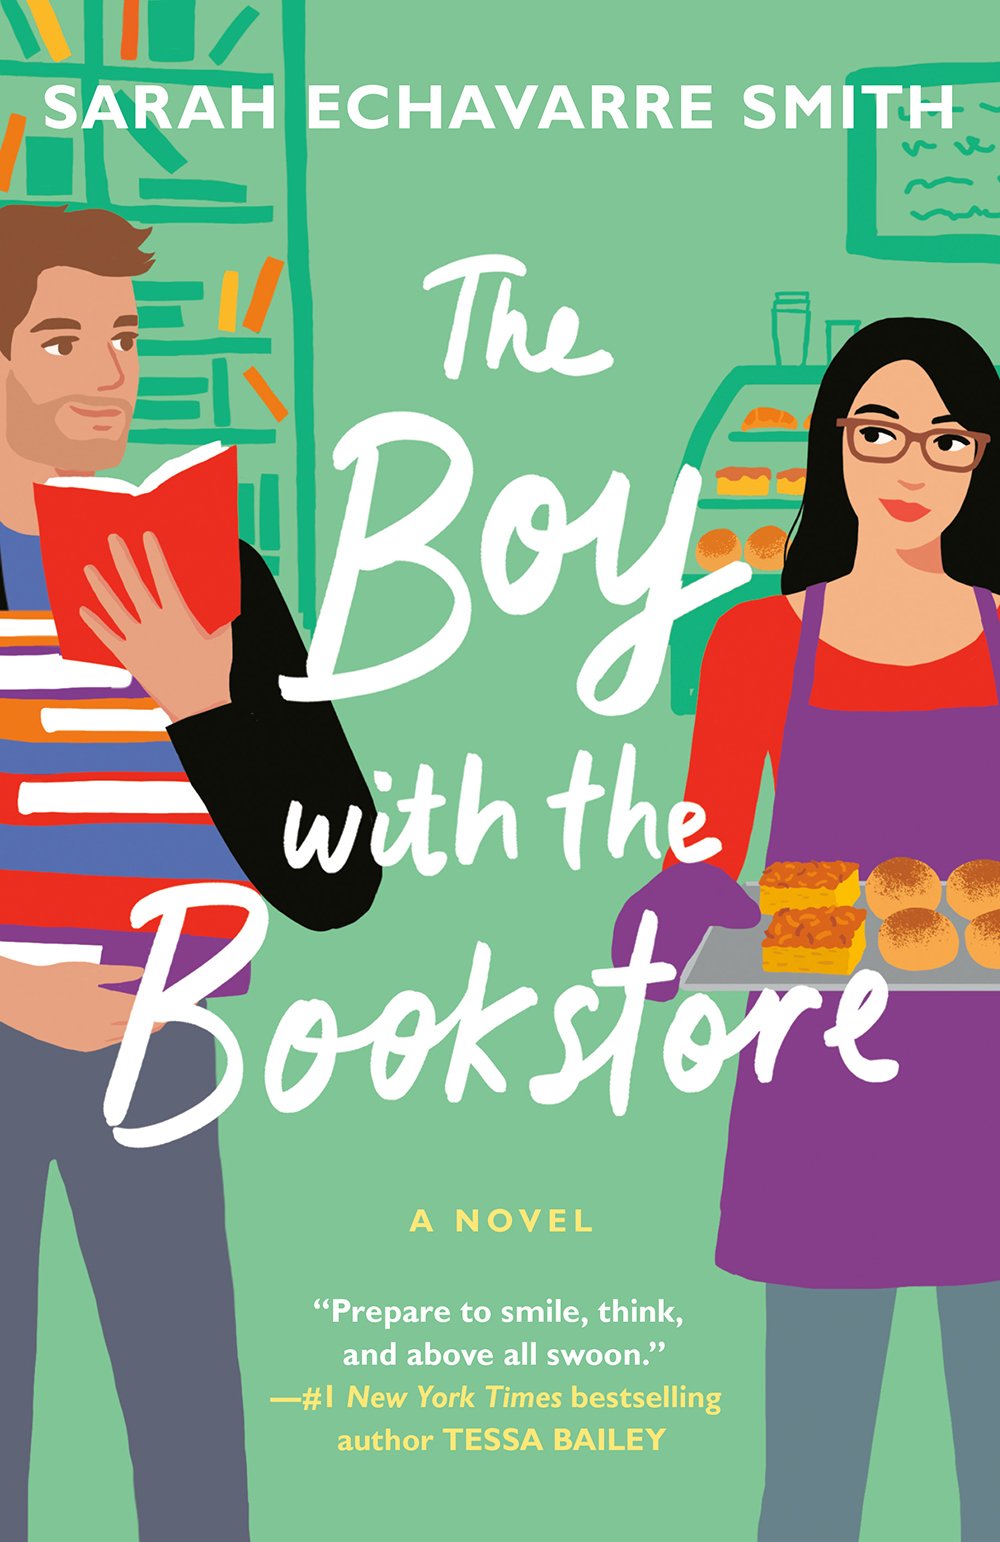 The cover of the romance book The Boy With the Bookstore by Sarah Echavarre Smith